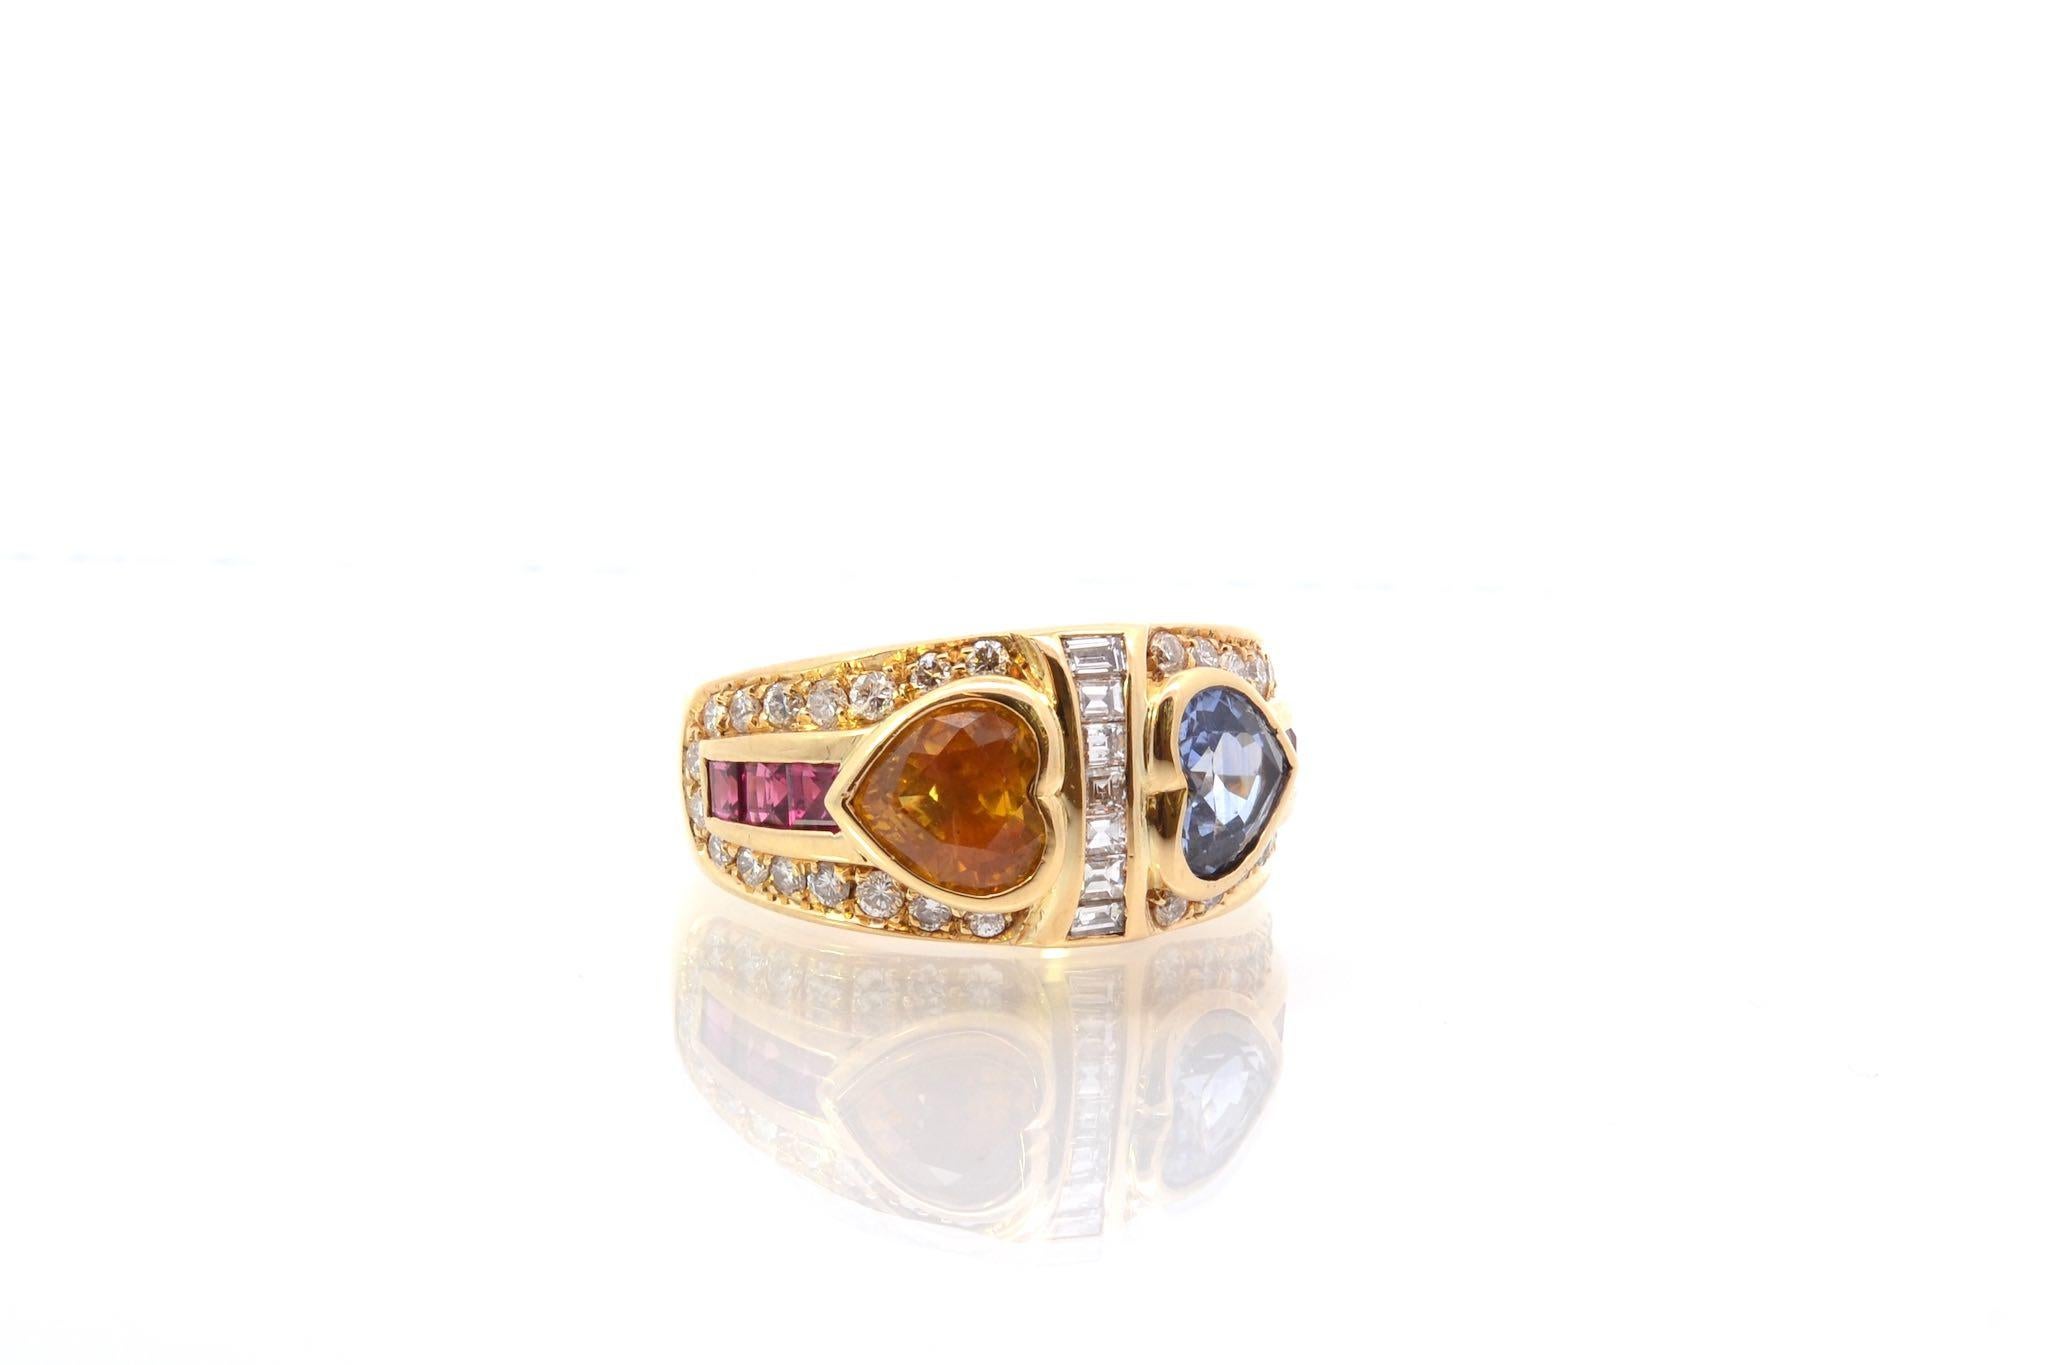 Heart Cut Sapphire, diamonds and rubies hearts ring in 18k gold For Sale